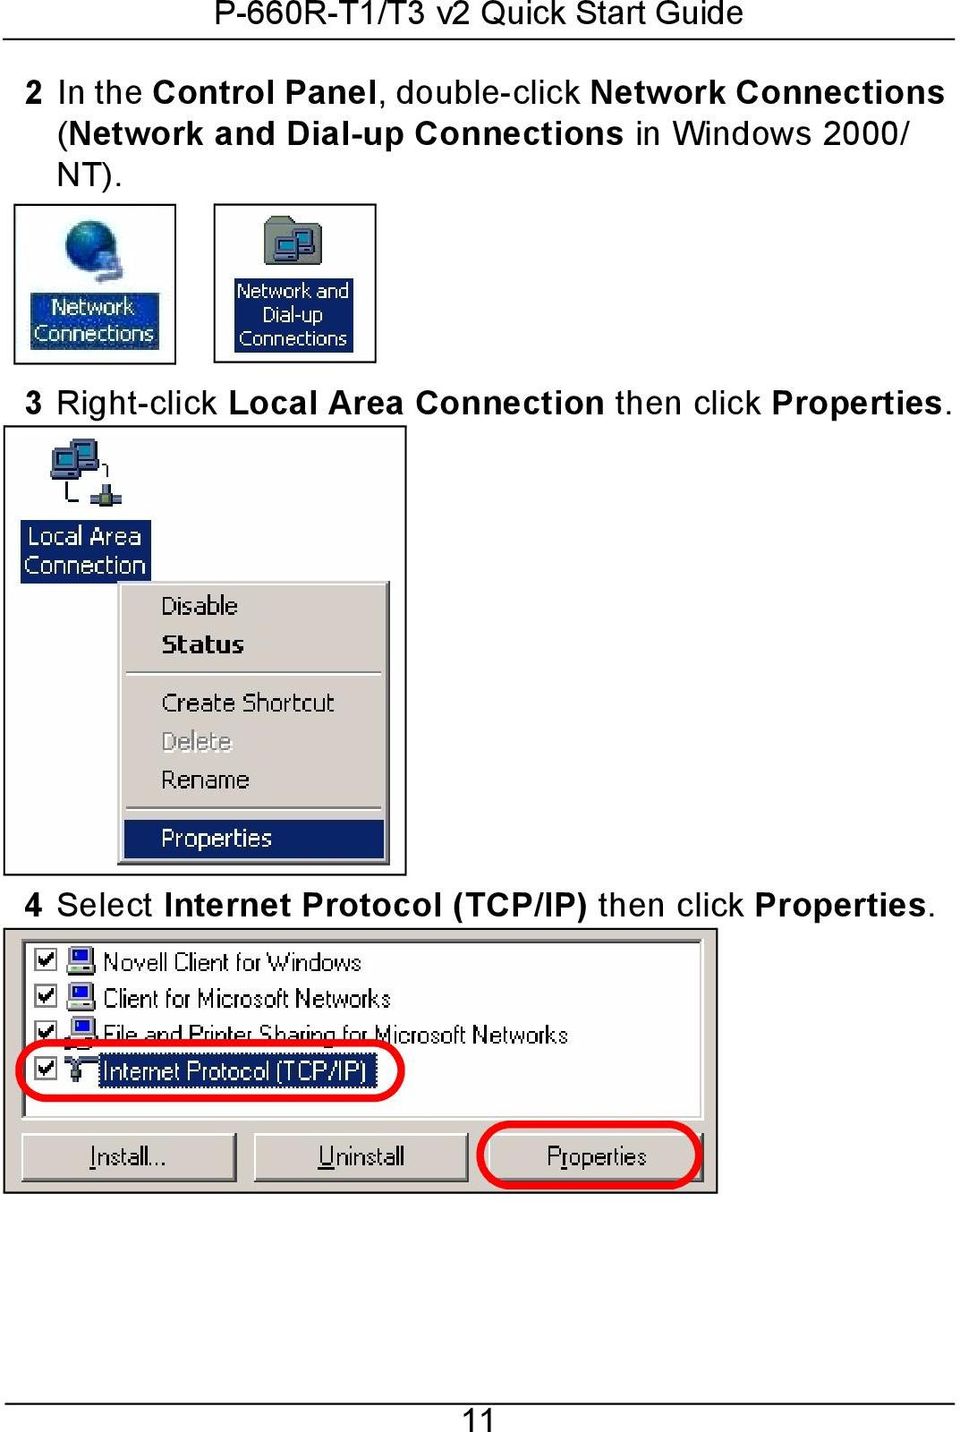 3 Right-click Local Area Connection then click Properties.